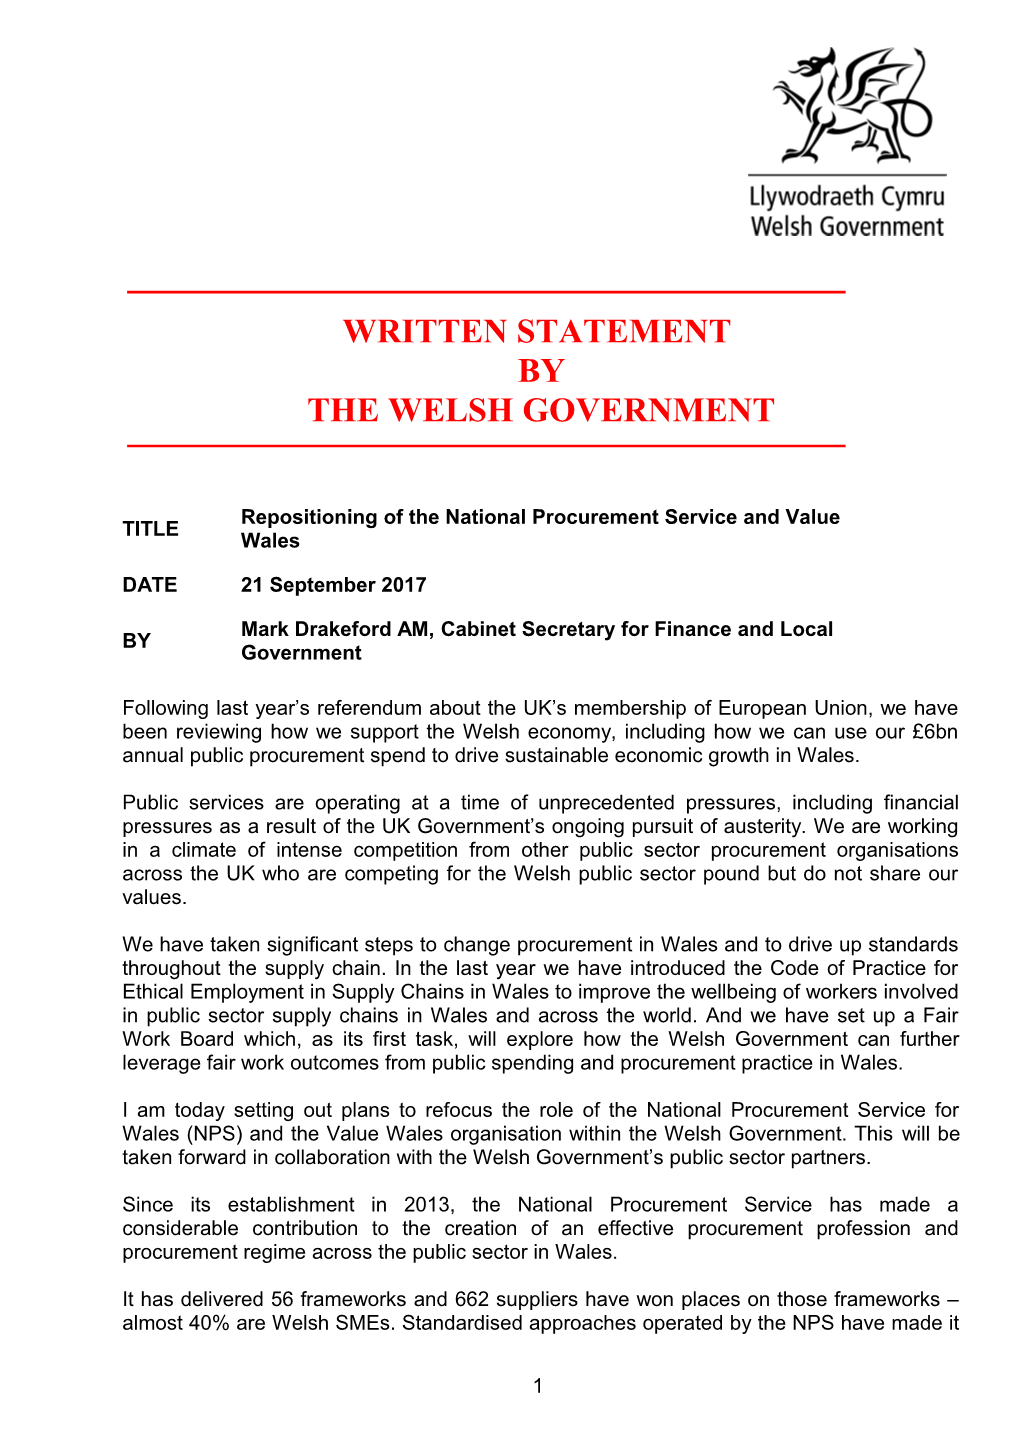 Repositioning of the National Procurement Service and Value Wales